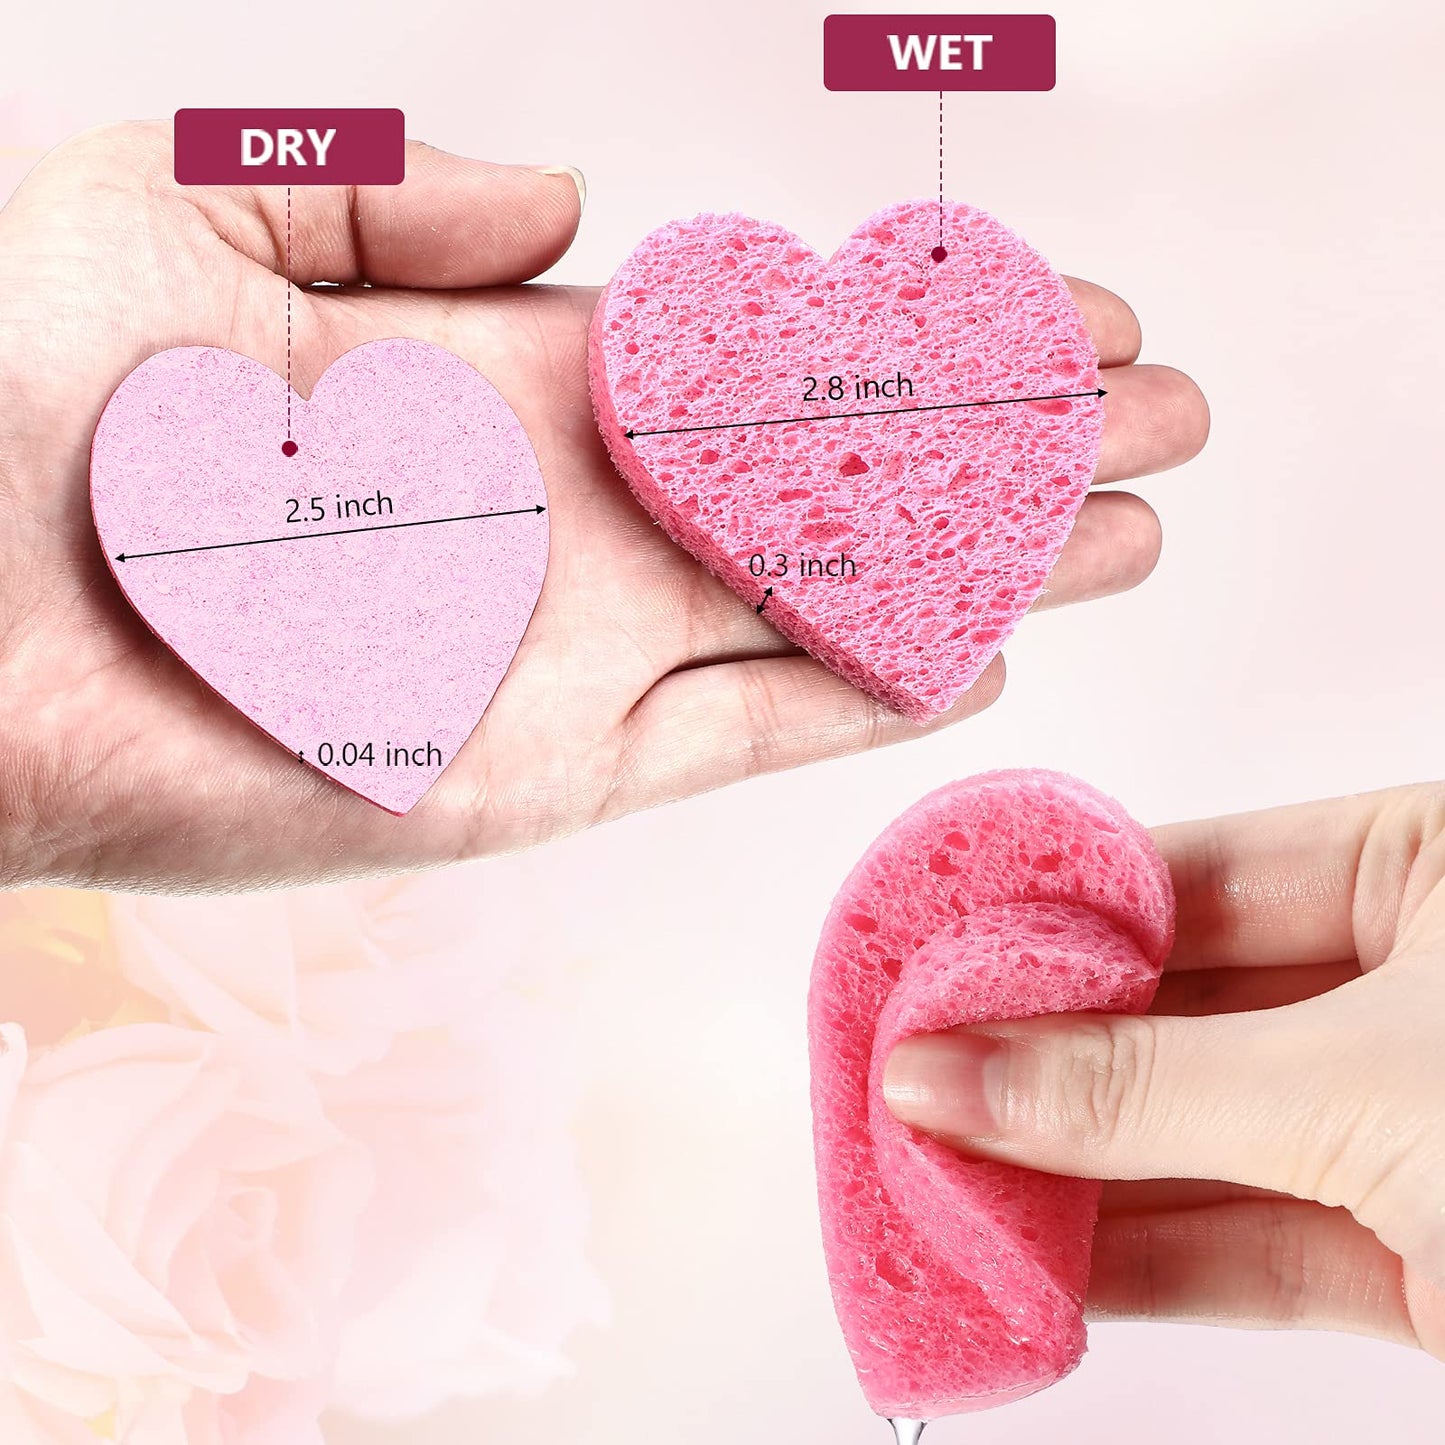 60 Pieces Facial Sponges with Container, Heart Shape Compressed Face Sponge Natural Sponge Pads for Washing Face Cleansing Exfoliating Esthetician Makeup Removal (Pink)